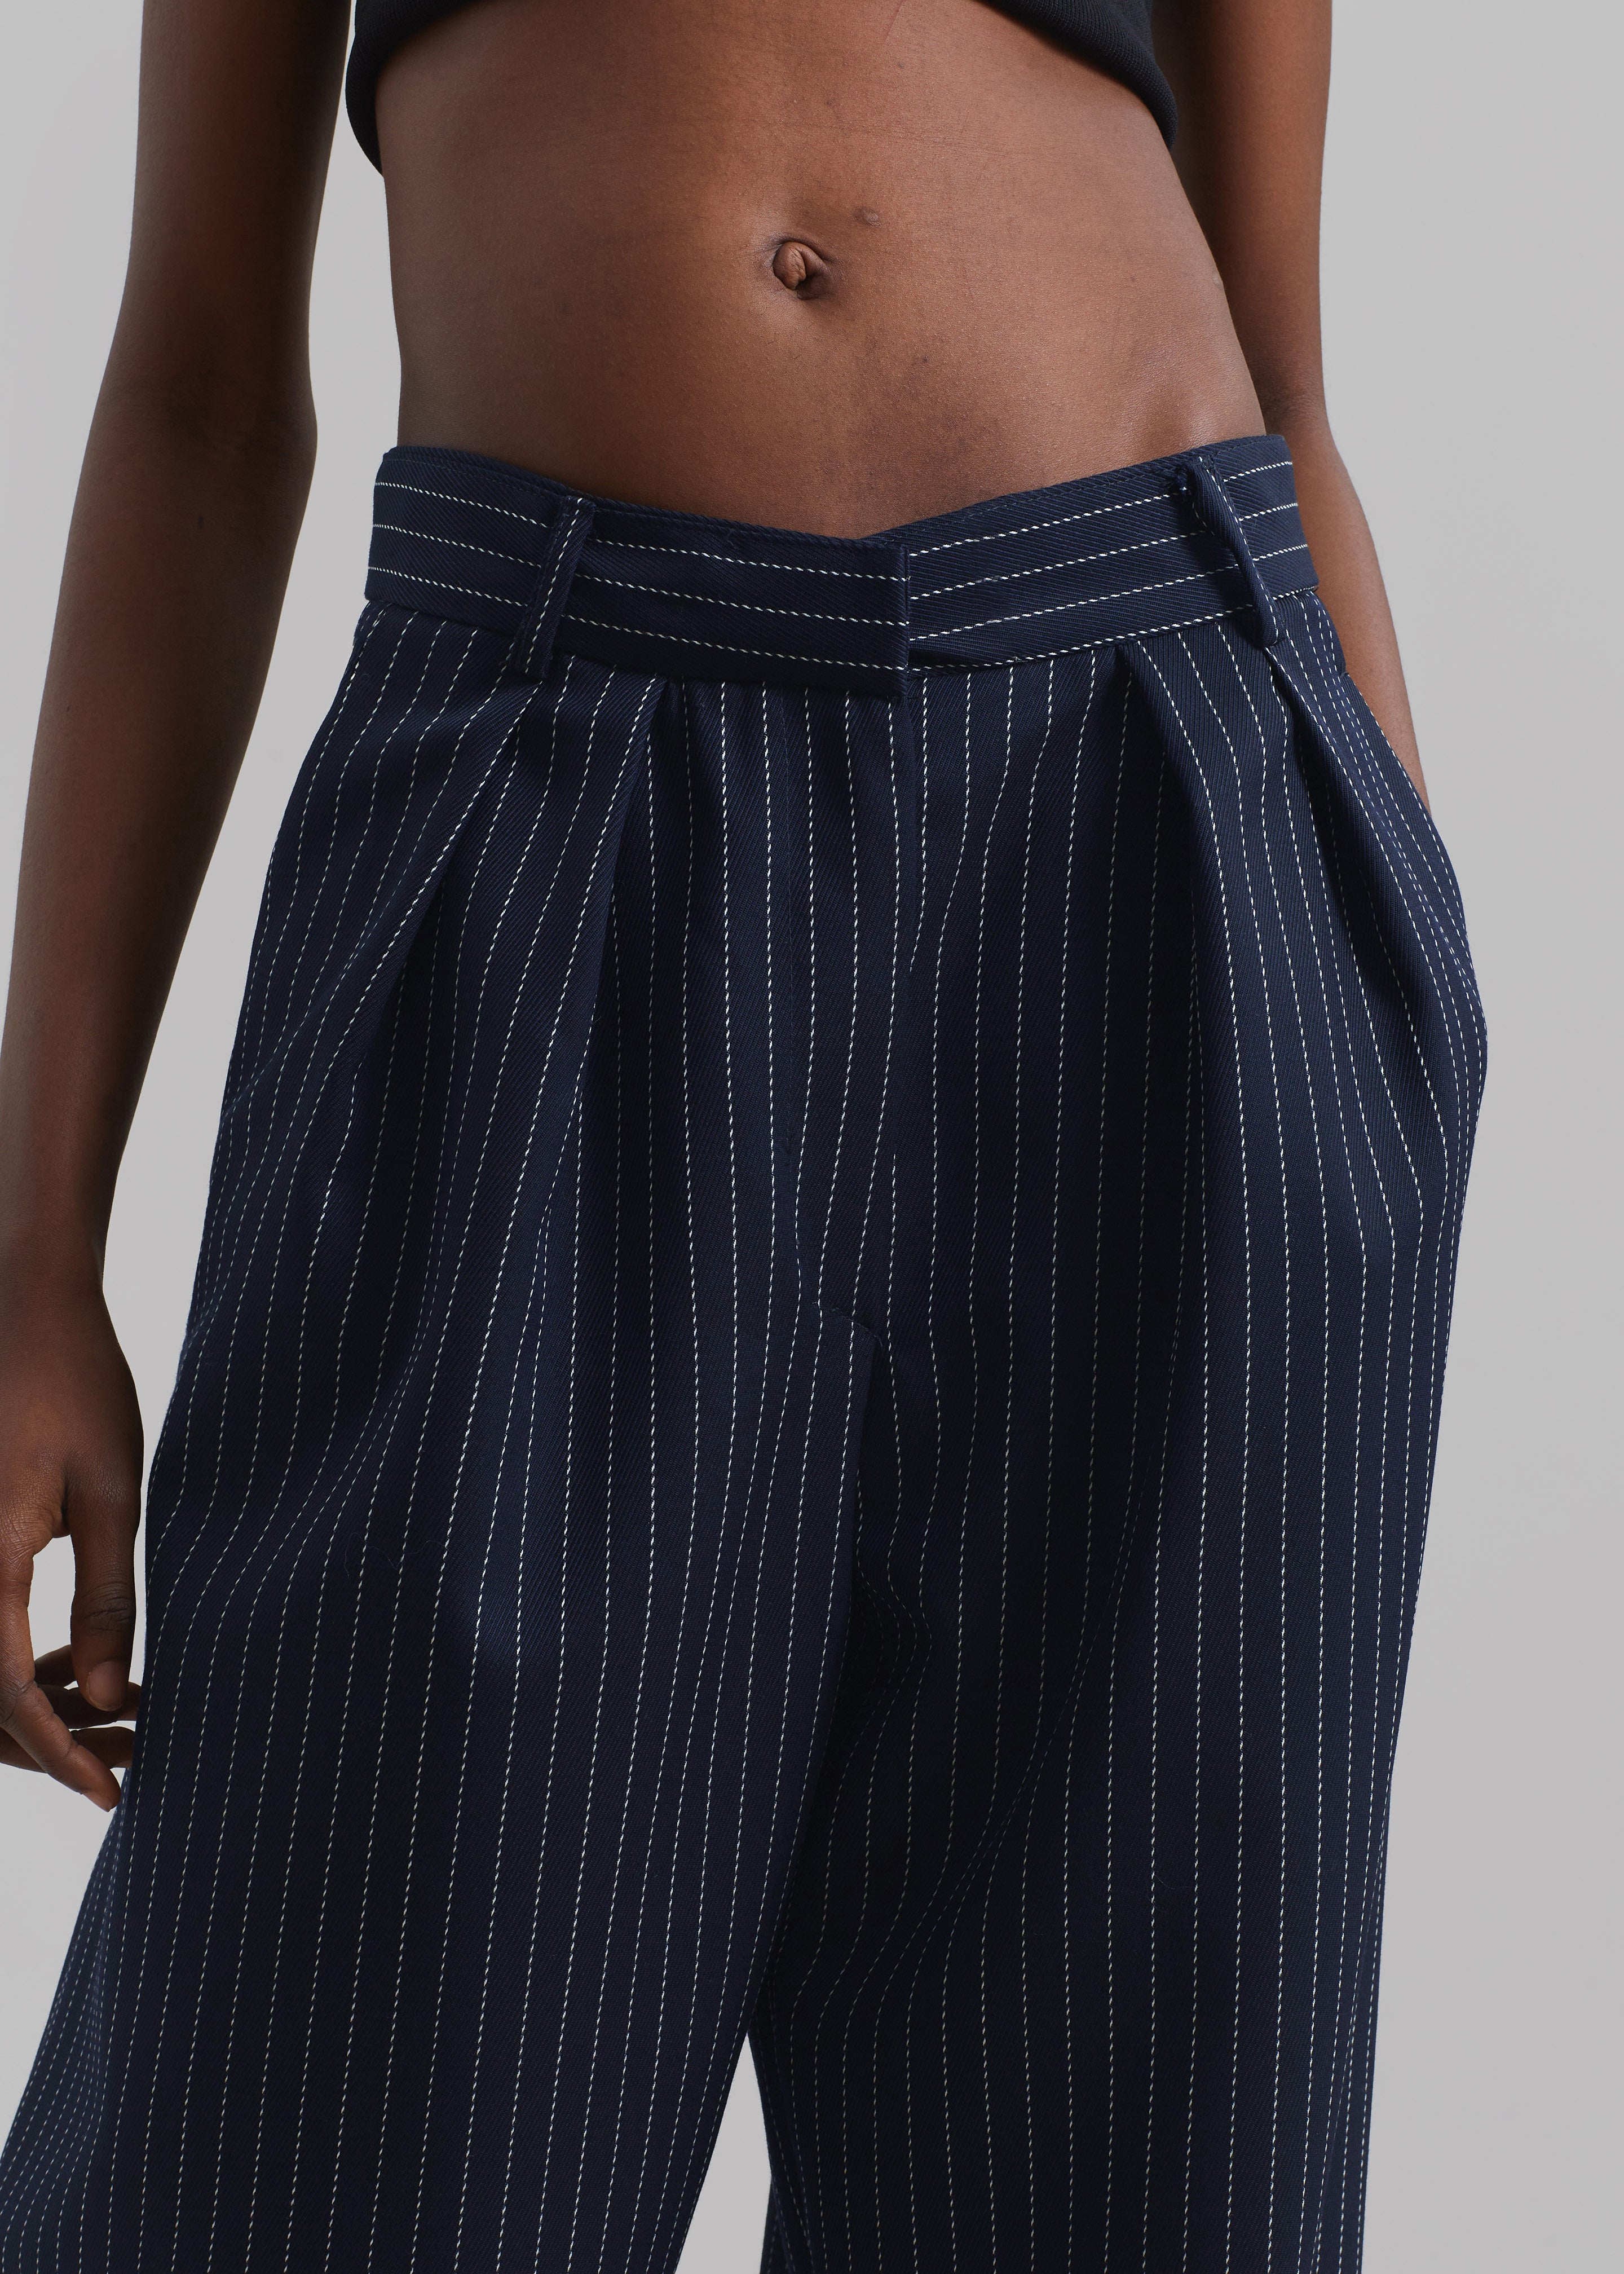 Ripley Pleated Twill Trousers - Navy/White Pinstripe - 3